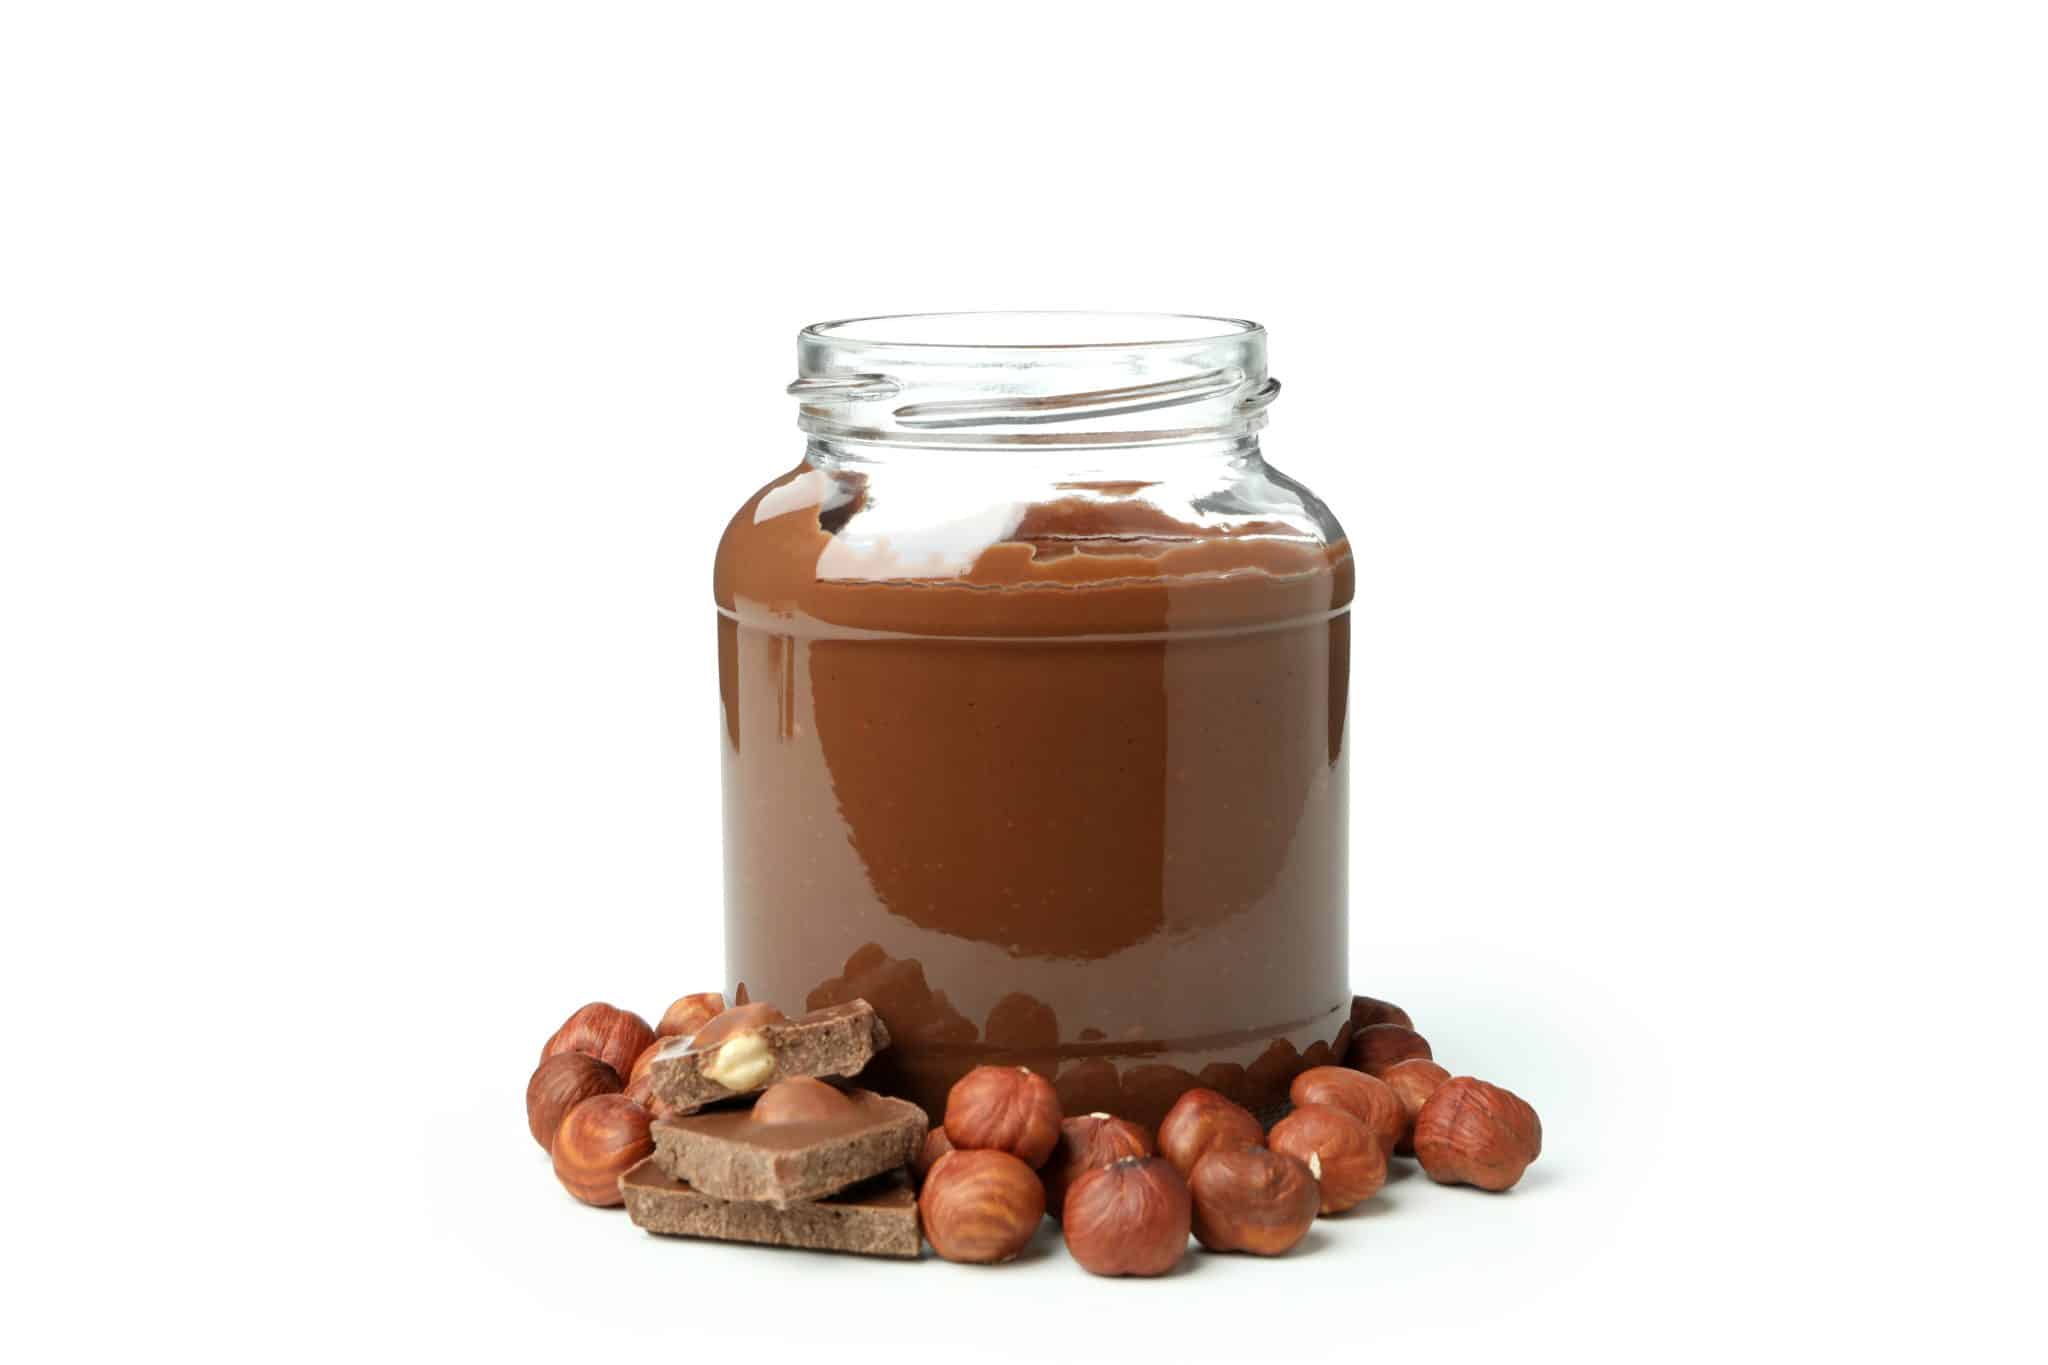 Jar with chocolate paste and nuts isolated on white background